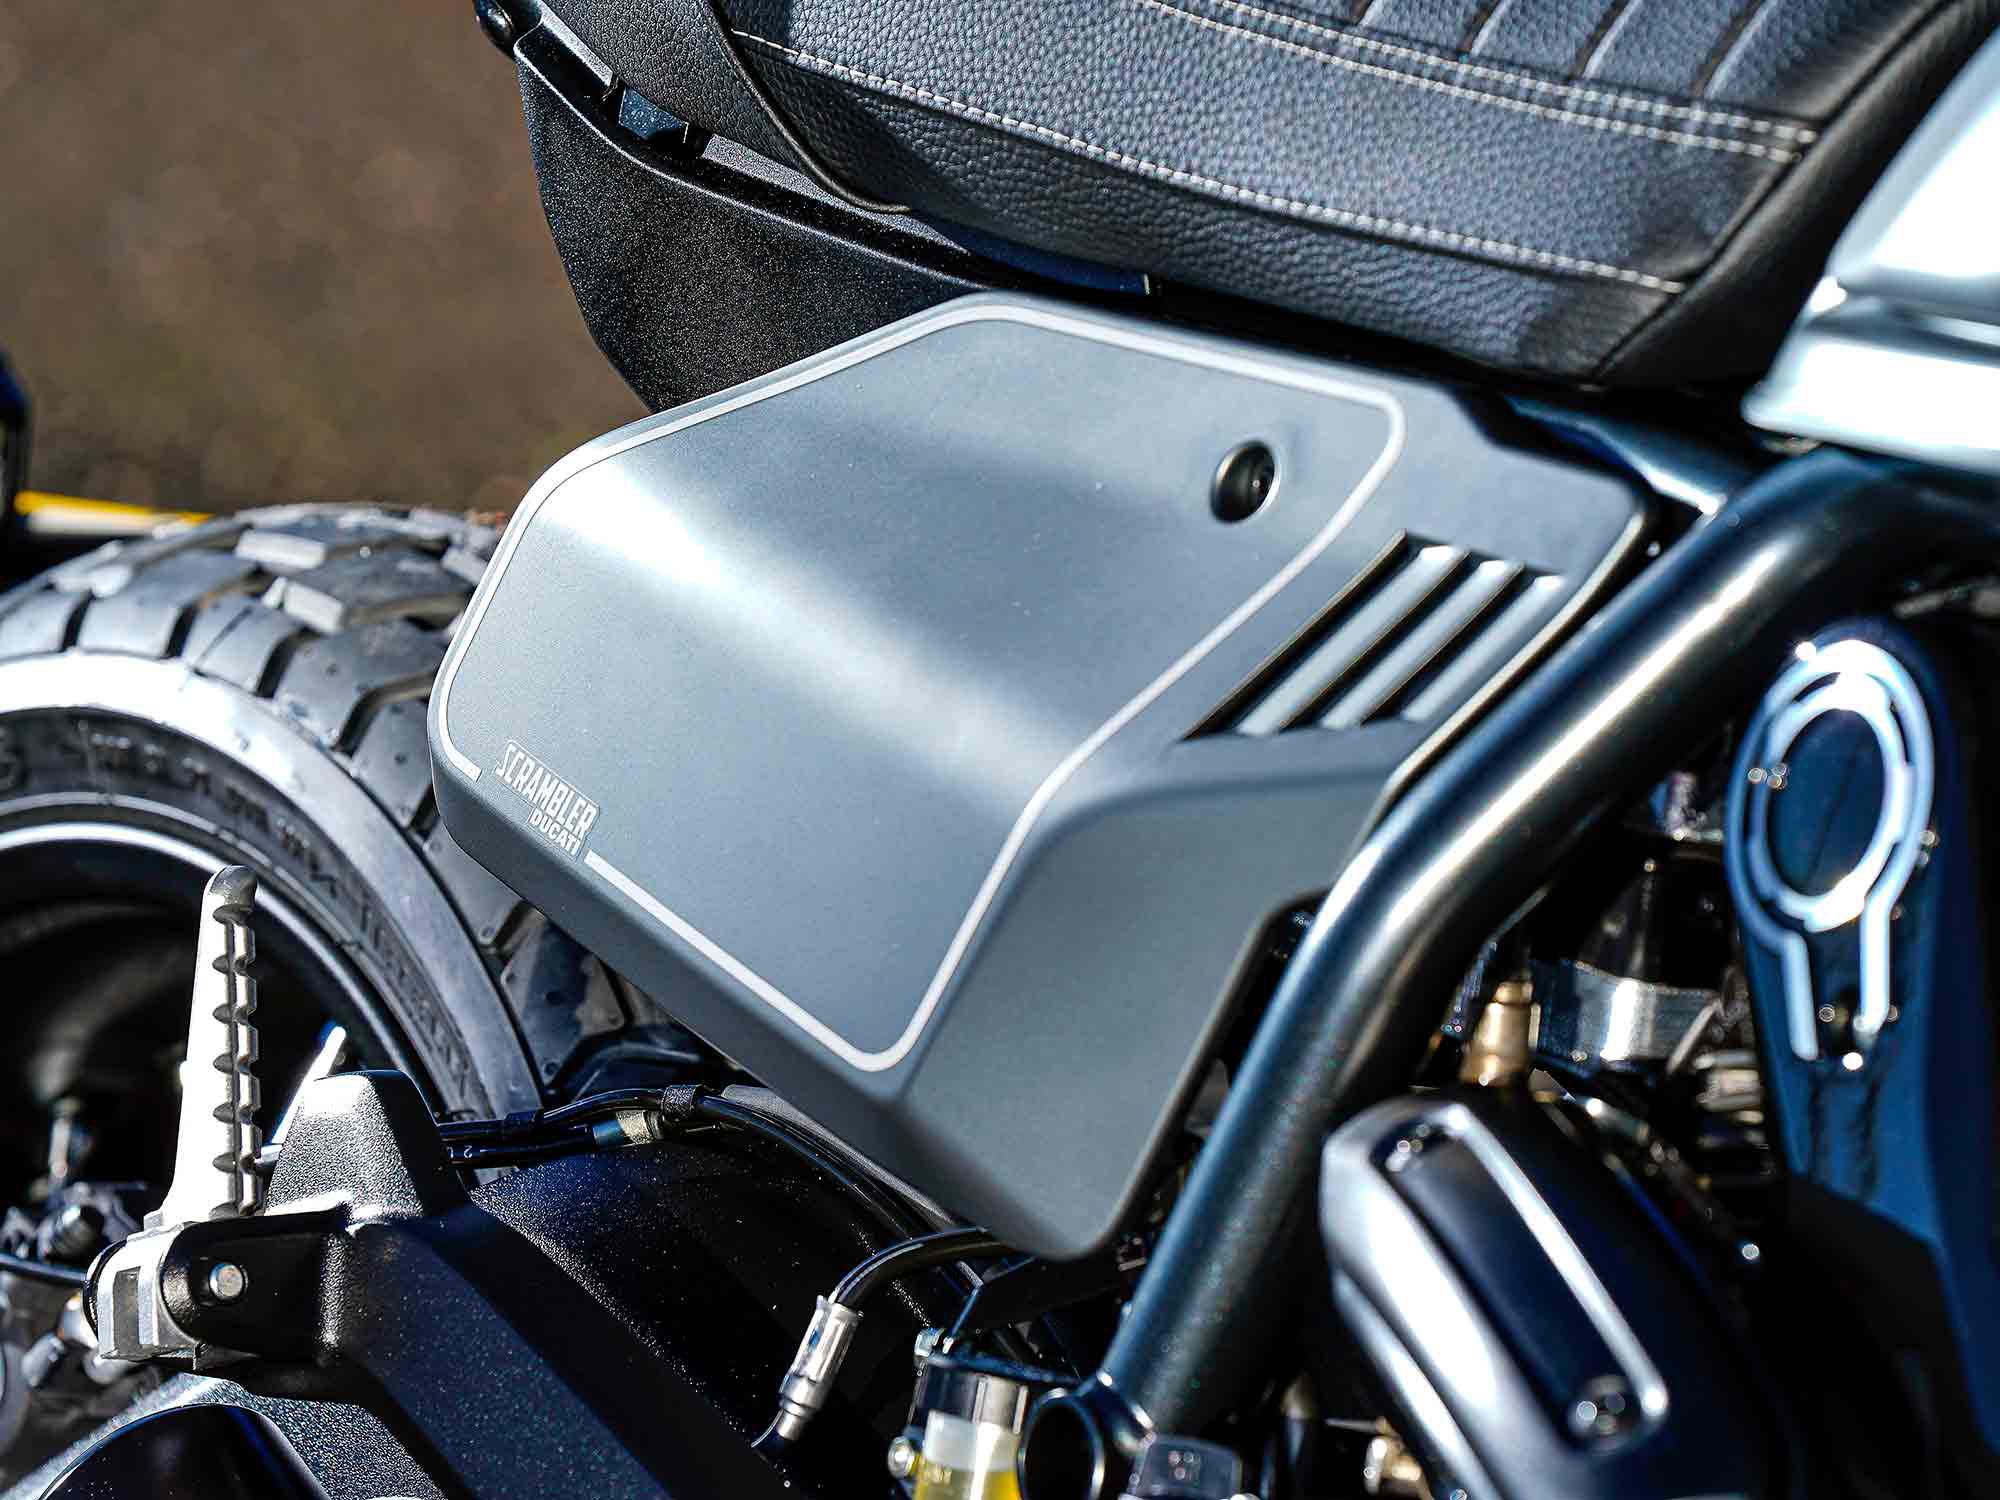 Two-channel cornering ABS, which was introduced in 2019, but still no traction control or rider modes.